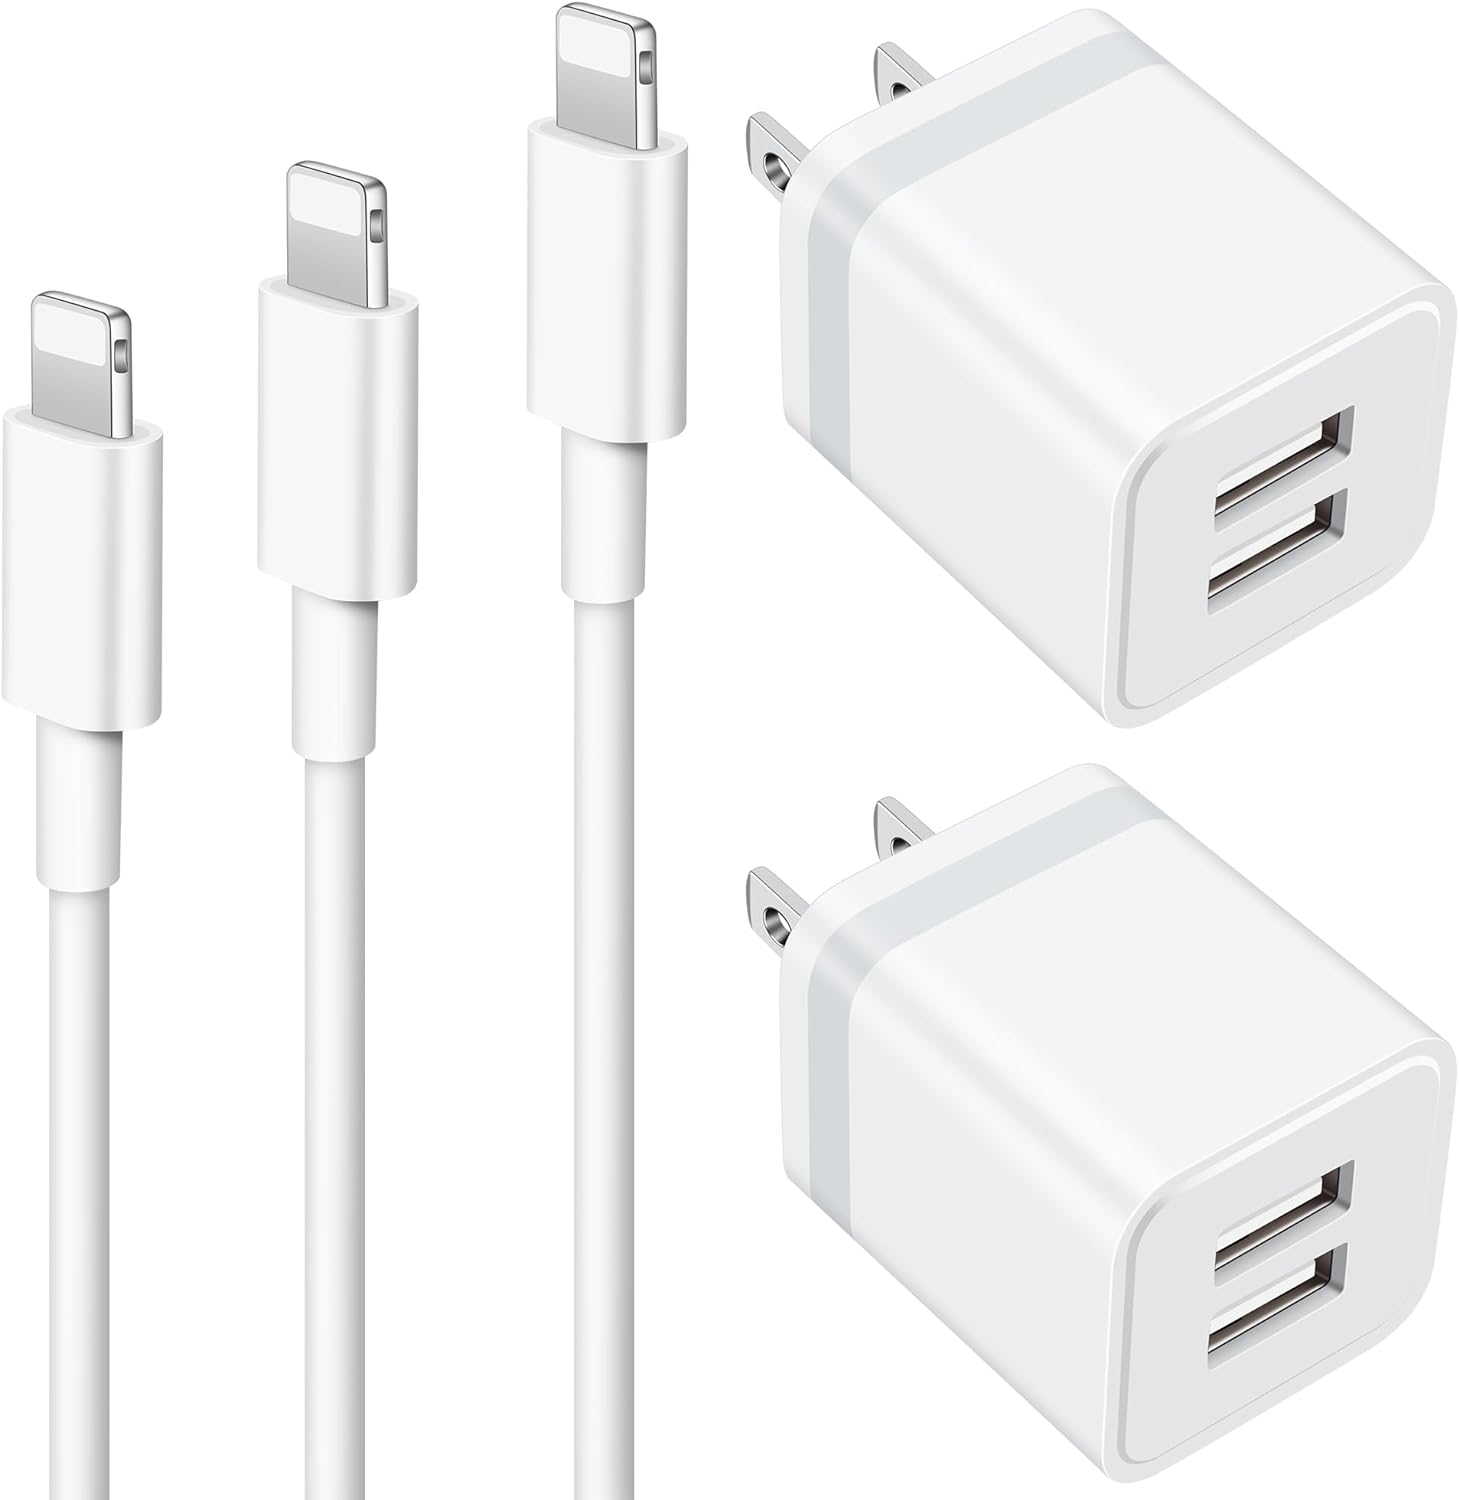 iPhone Charger [MFi Certified], ARCCRA 3FT 6FT 10FT iPhone Charger Cord Long Charging Cable + 2 X Dual USB Wall Charger Block Plug Power Adapter Cube for iPhone 14 13 12 Pro Max 11 XS XR X 8 7 6 Plus